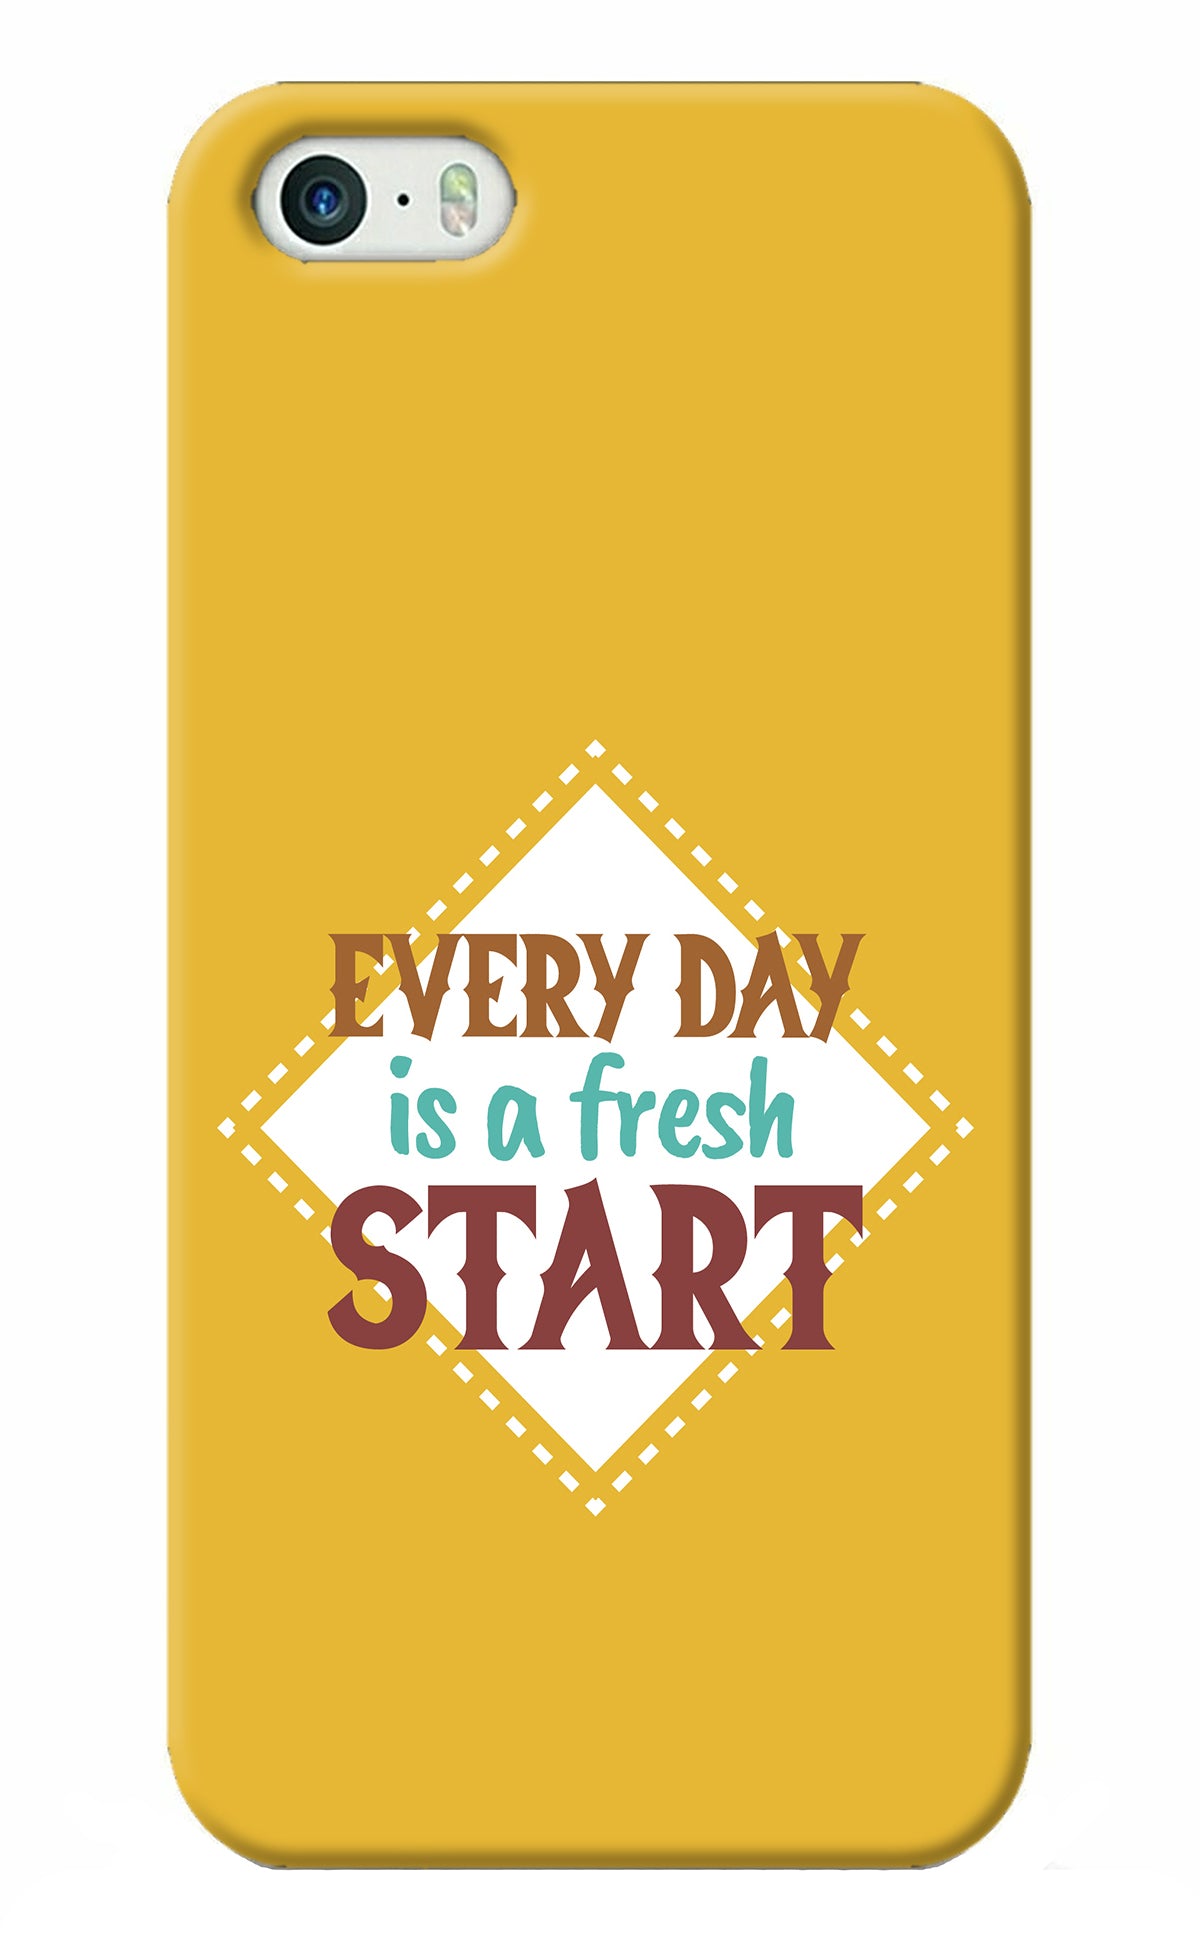 Every day is a Fresh Start iPhone 5/5s Back Cover